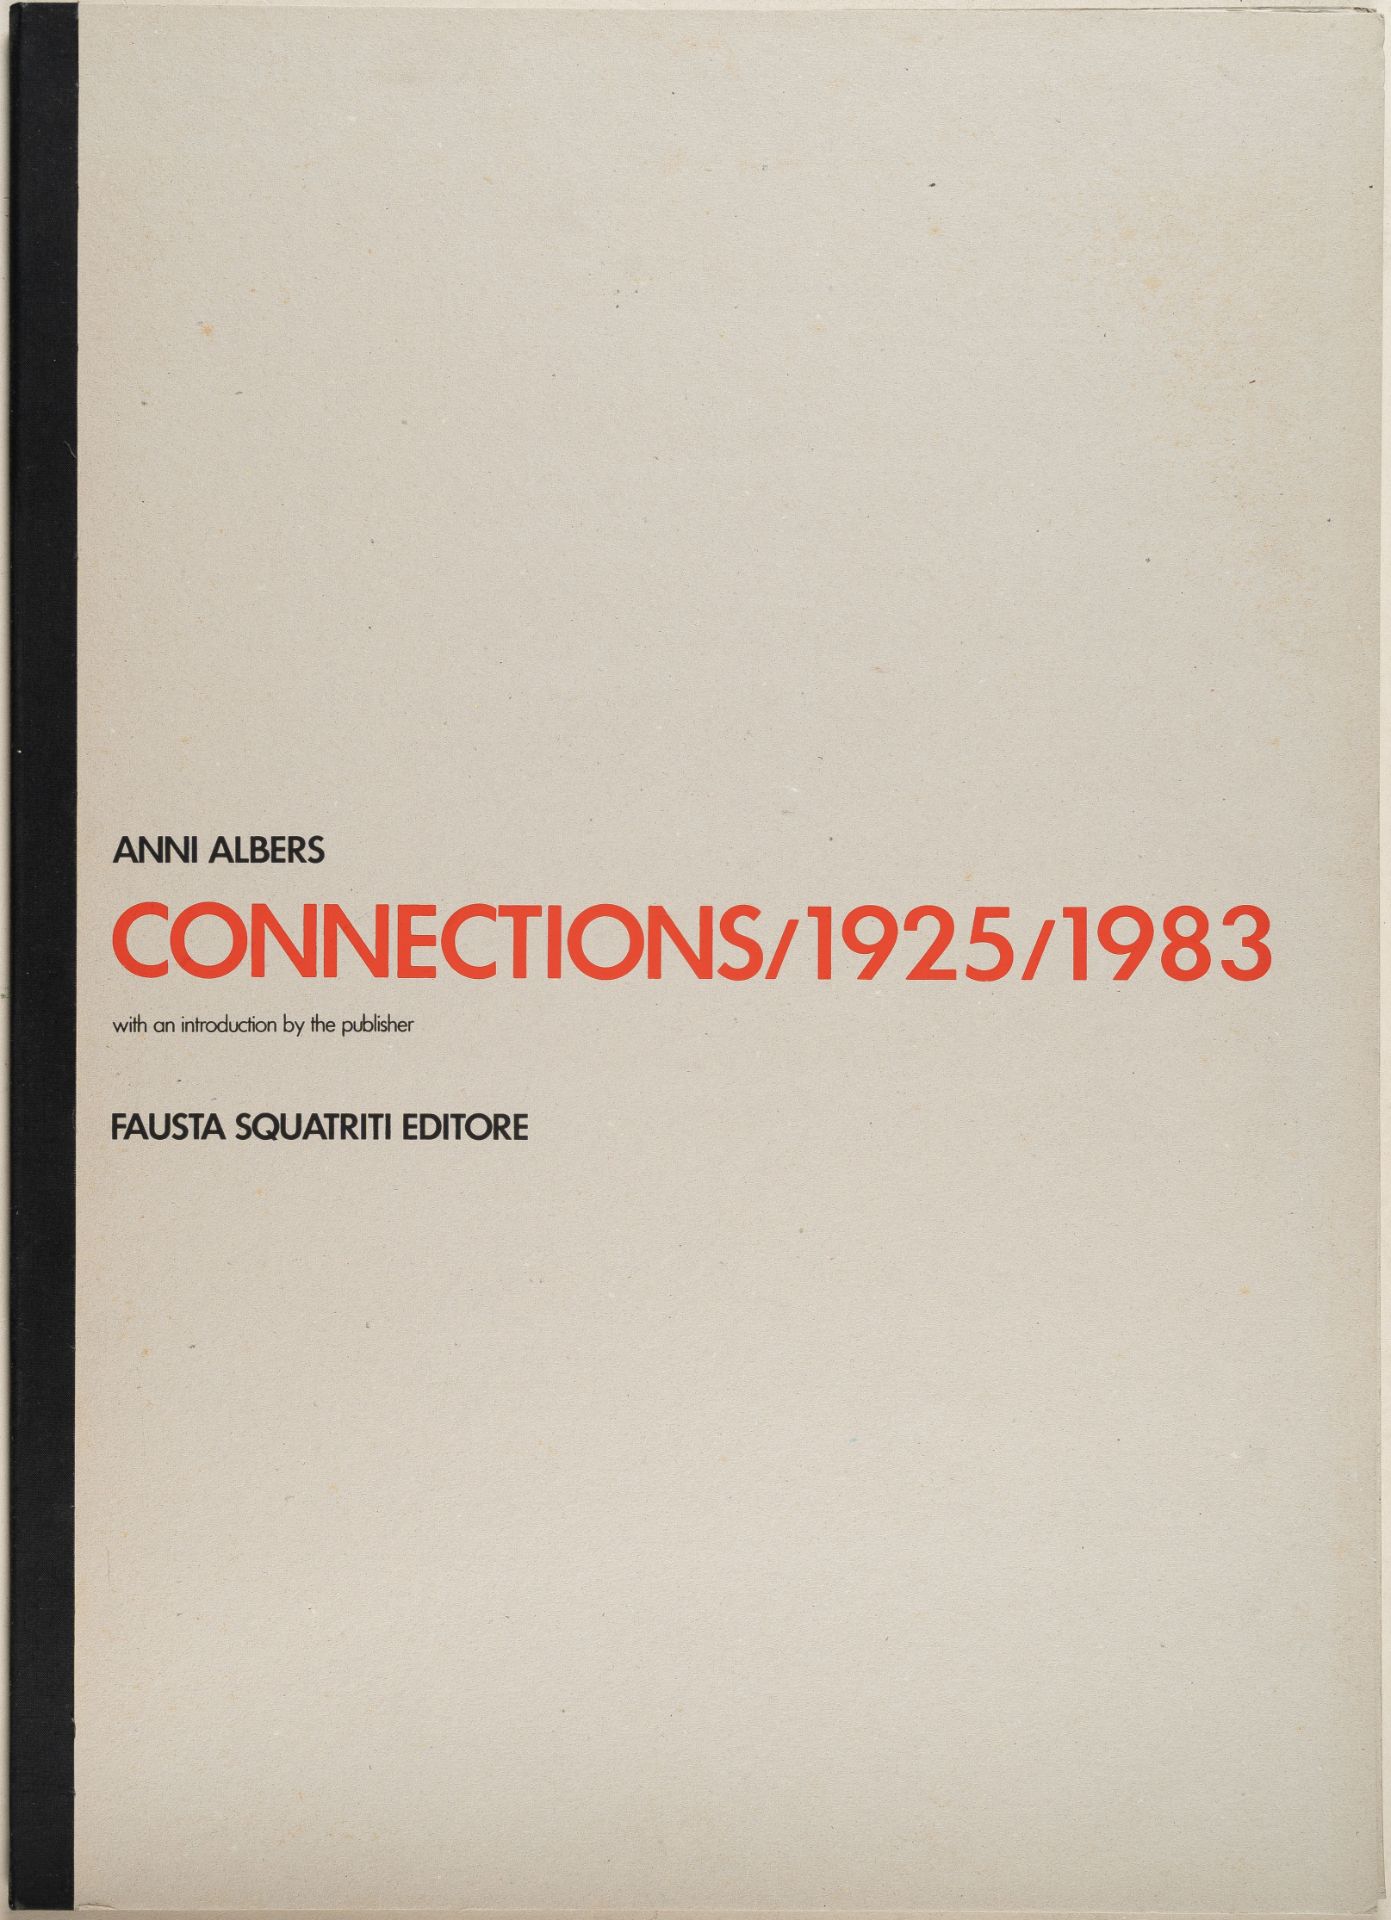 Anni Albers, Connections 1925/1983.Portfolio of 9 silkscreens in colours on wove, partially by - Image 17 of 17